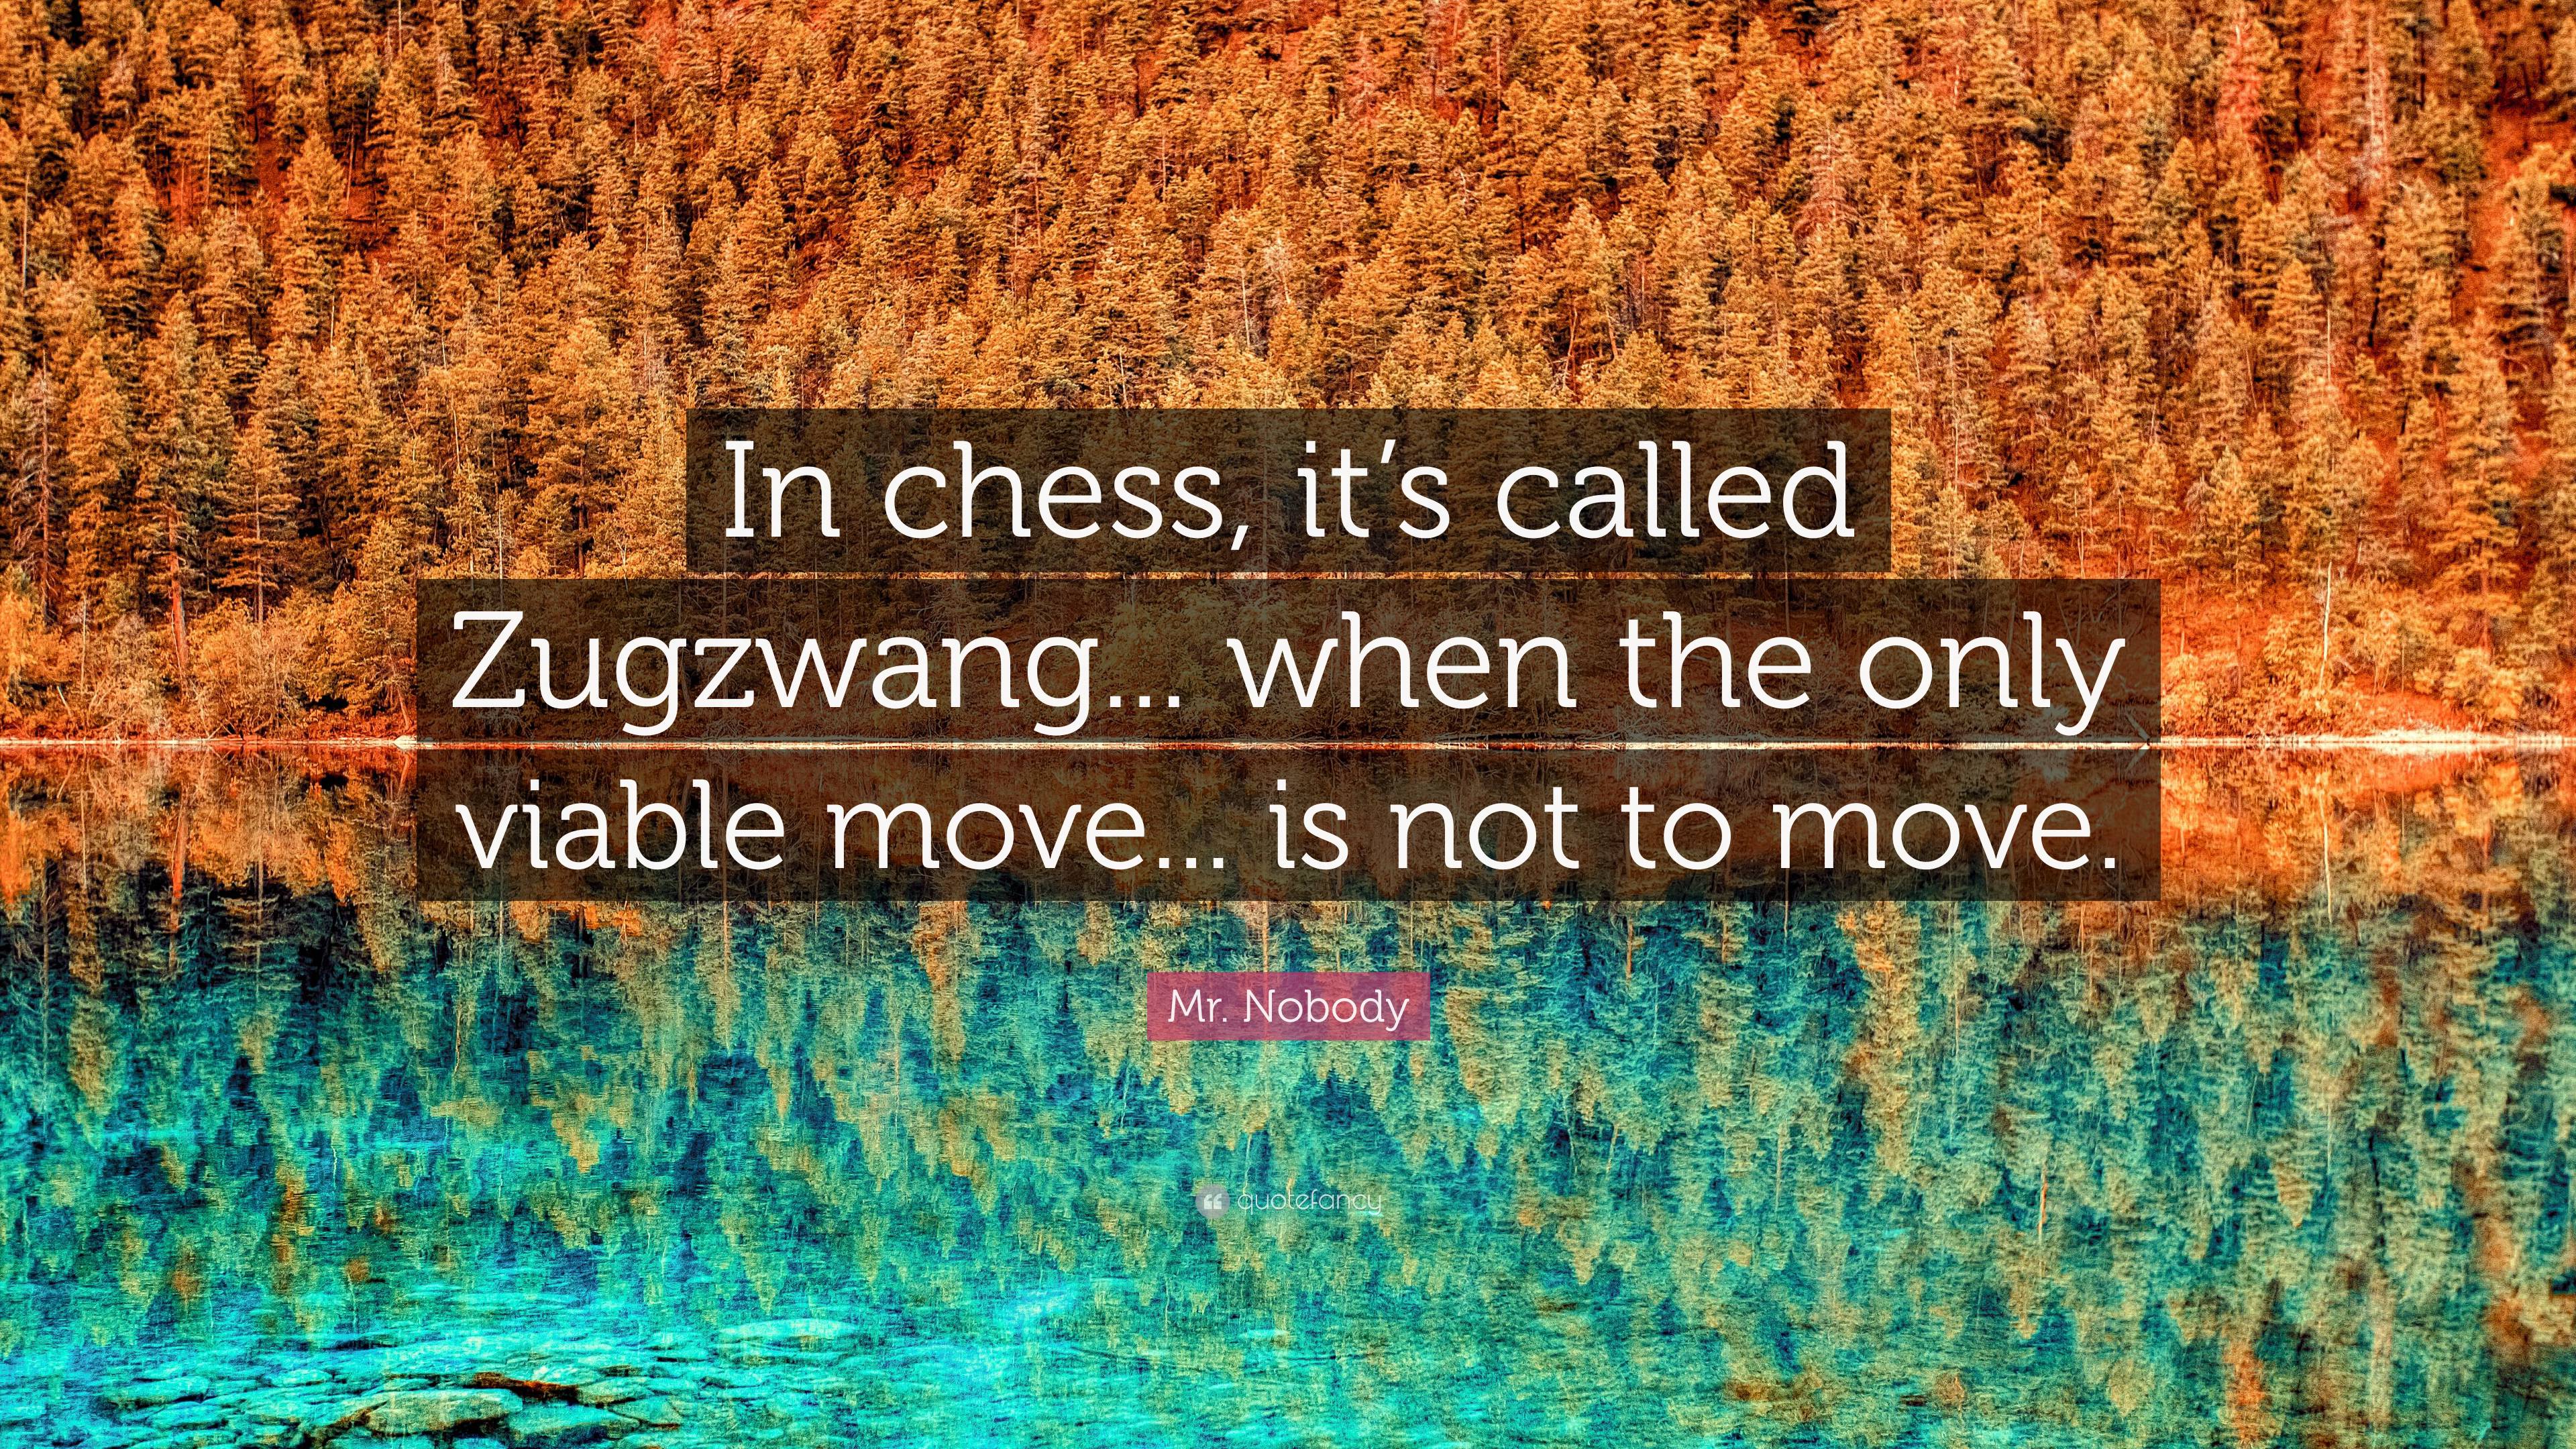 Is this a Zugzwang? : r/chess